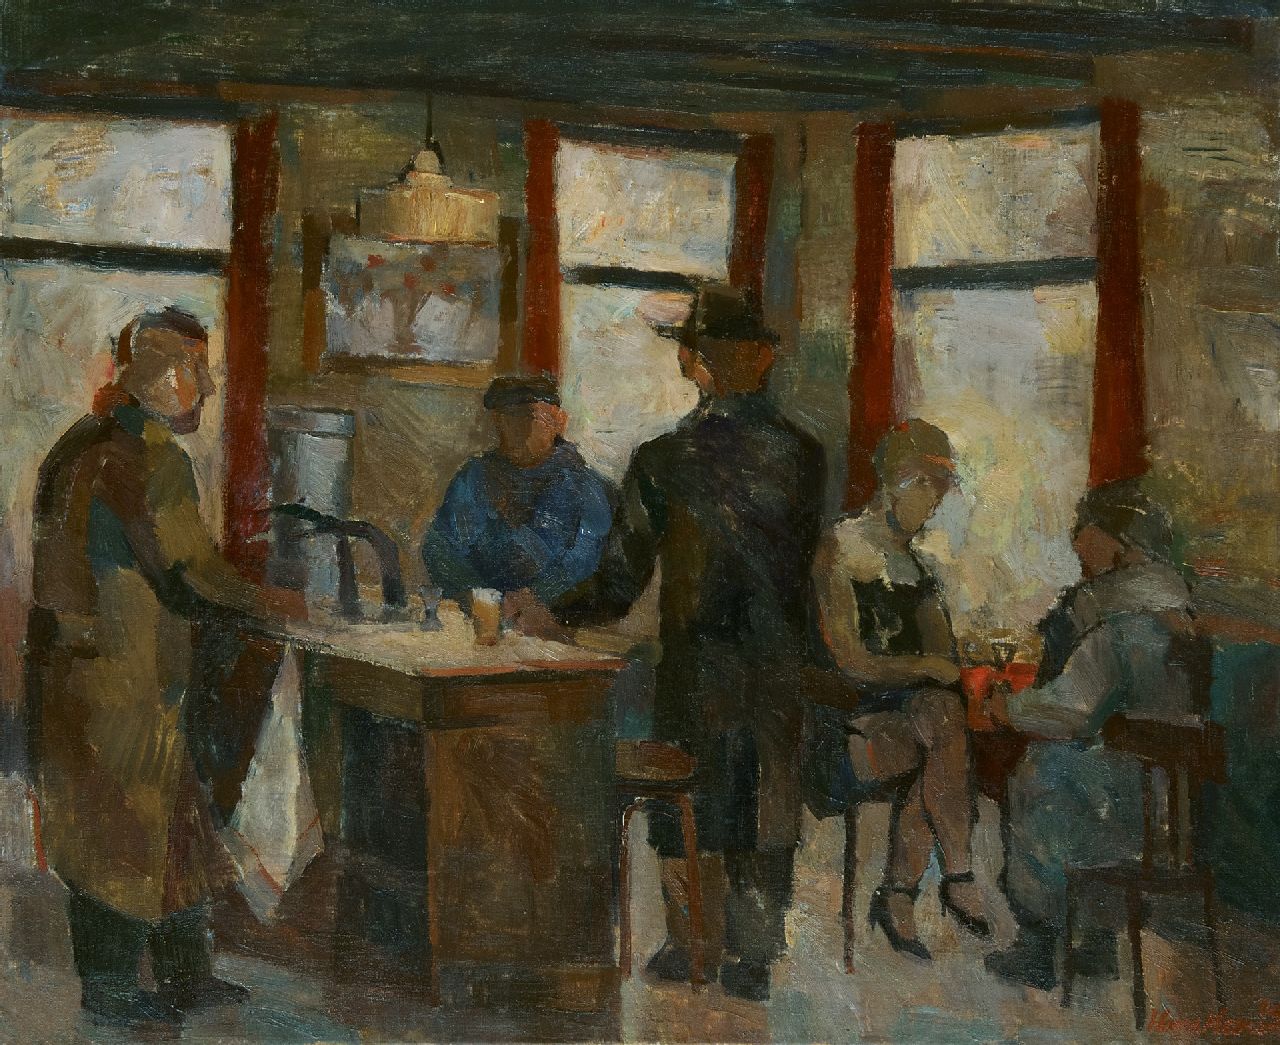 Hans Heeren | Café interior in Middelburg, oil on canvas, 100.0 x 120.5 cm, signed l.r. and dated  '69